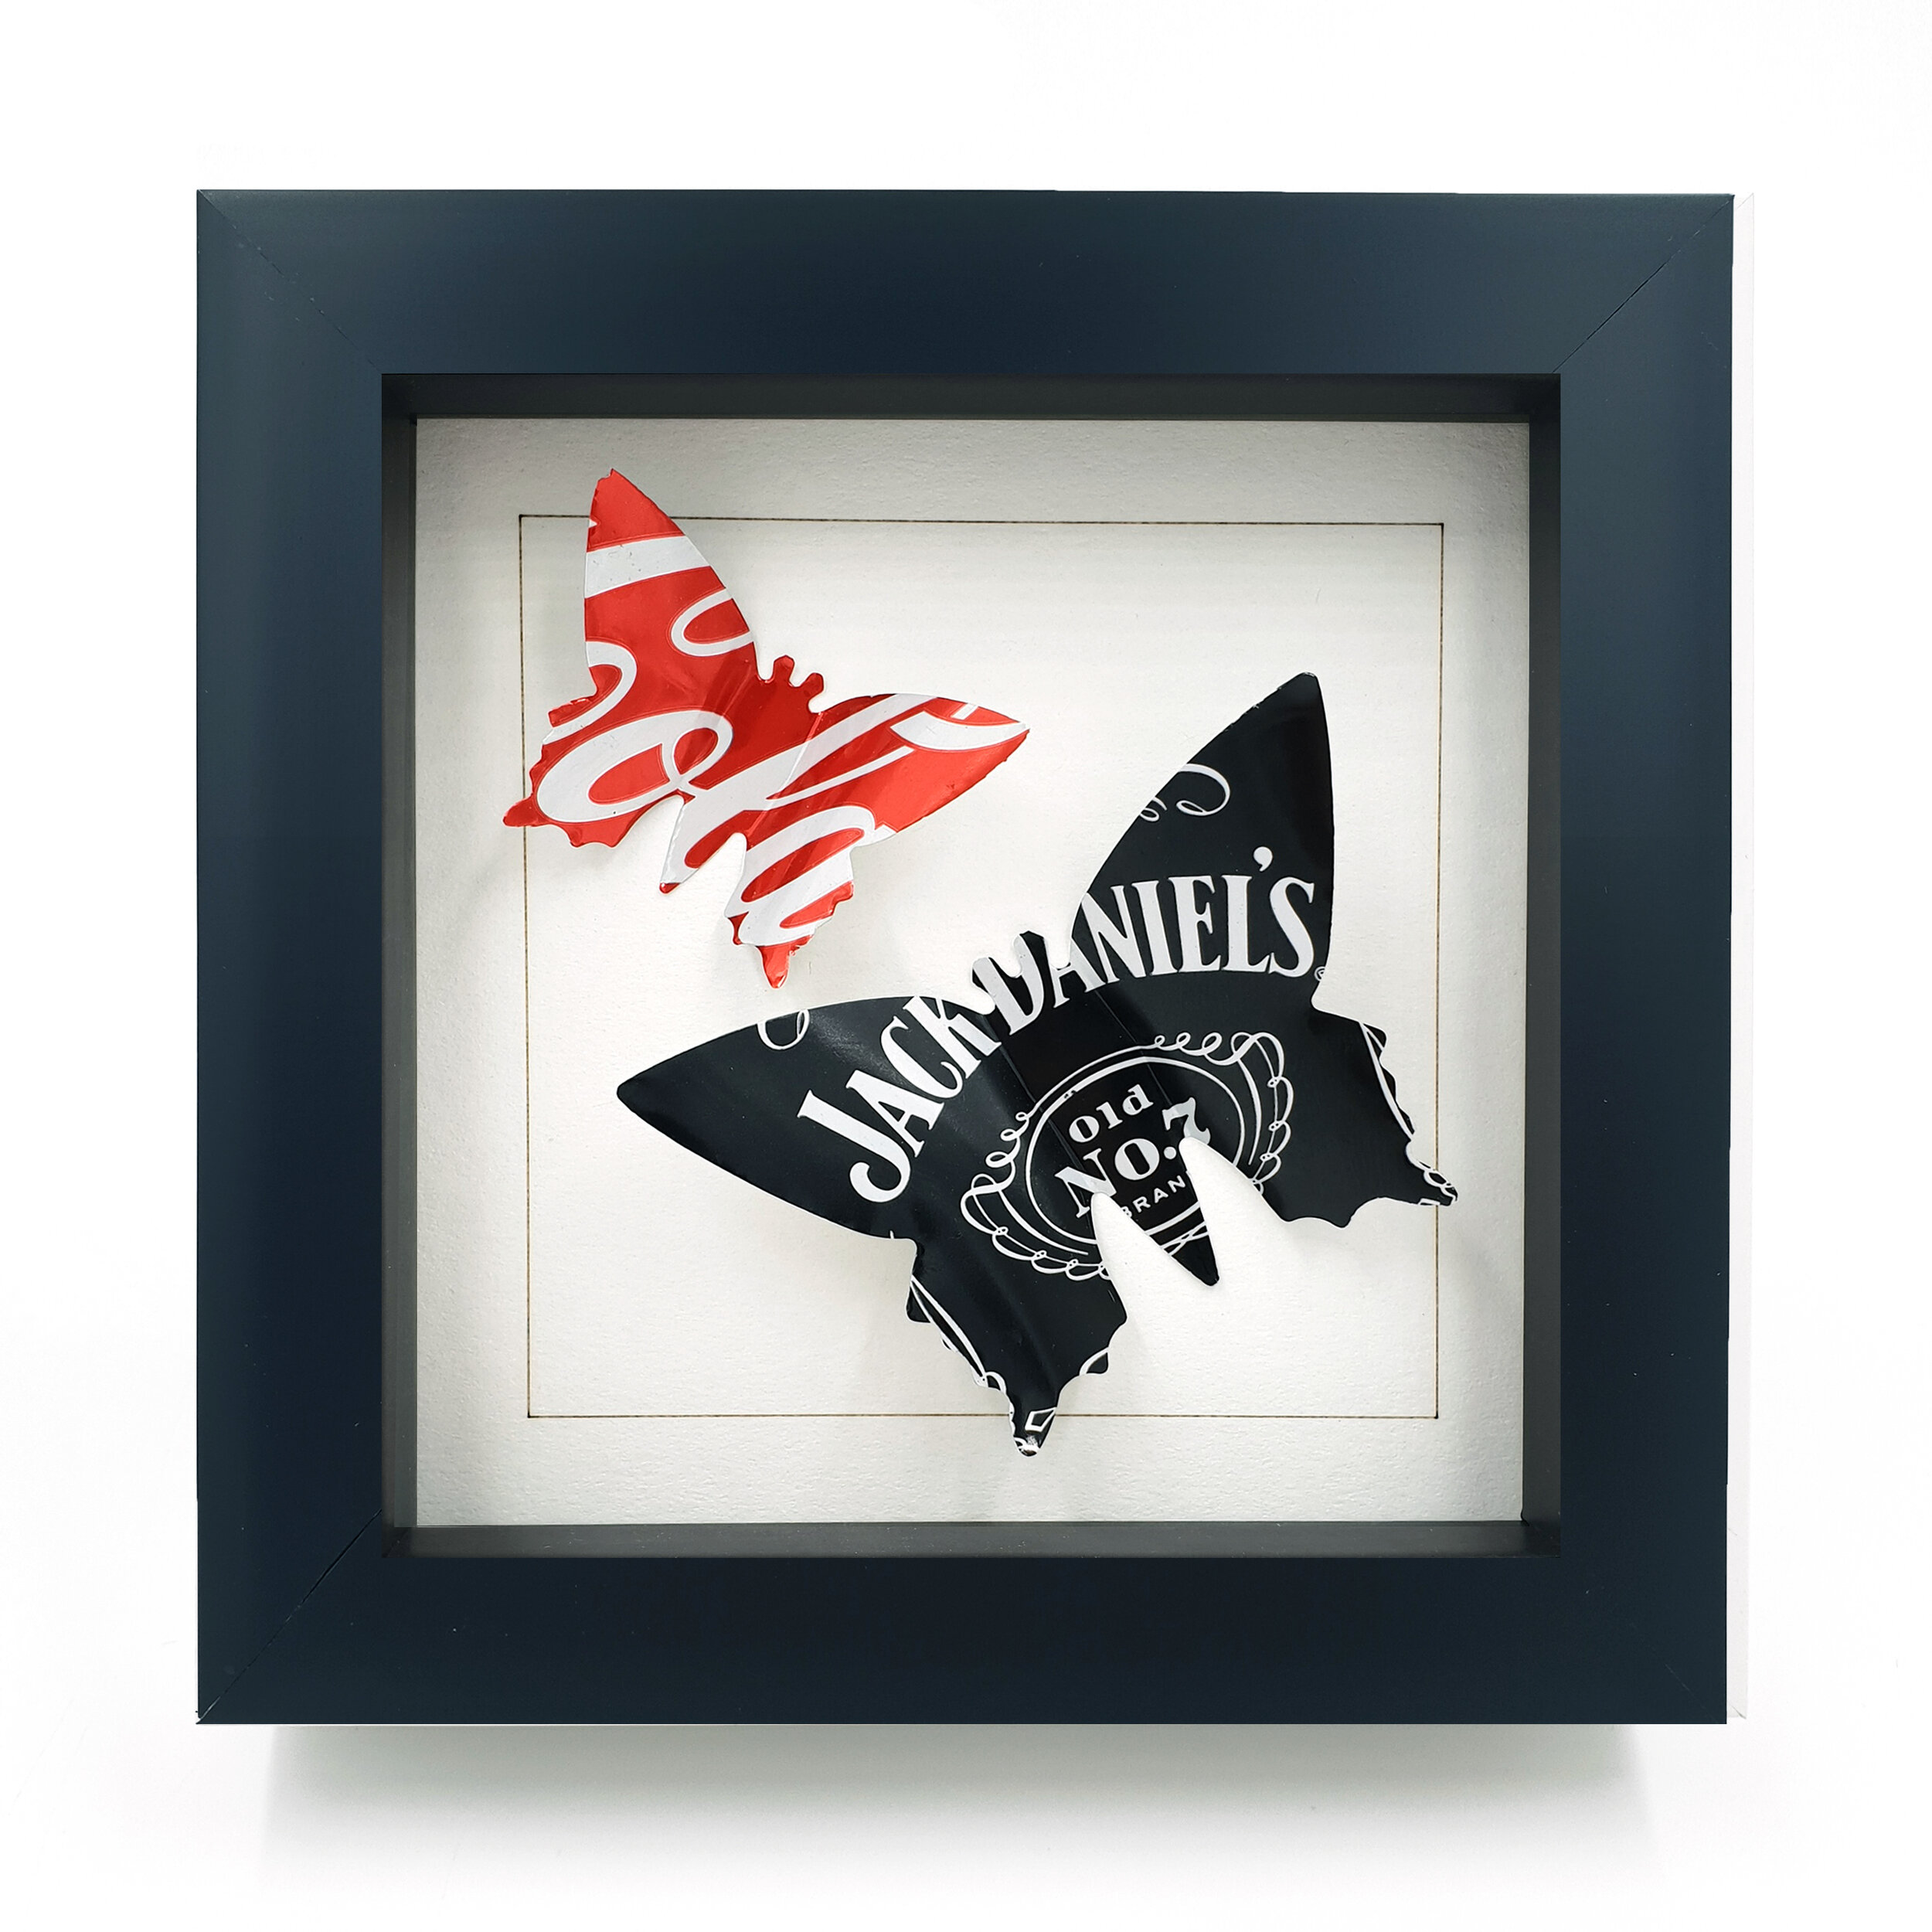 Red and black Coca-Cola and Jack Daniels double butterfly eco art black frame